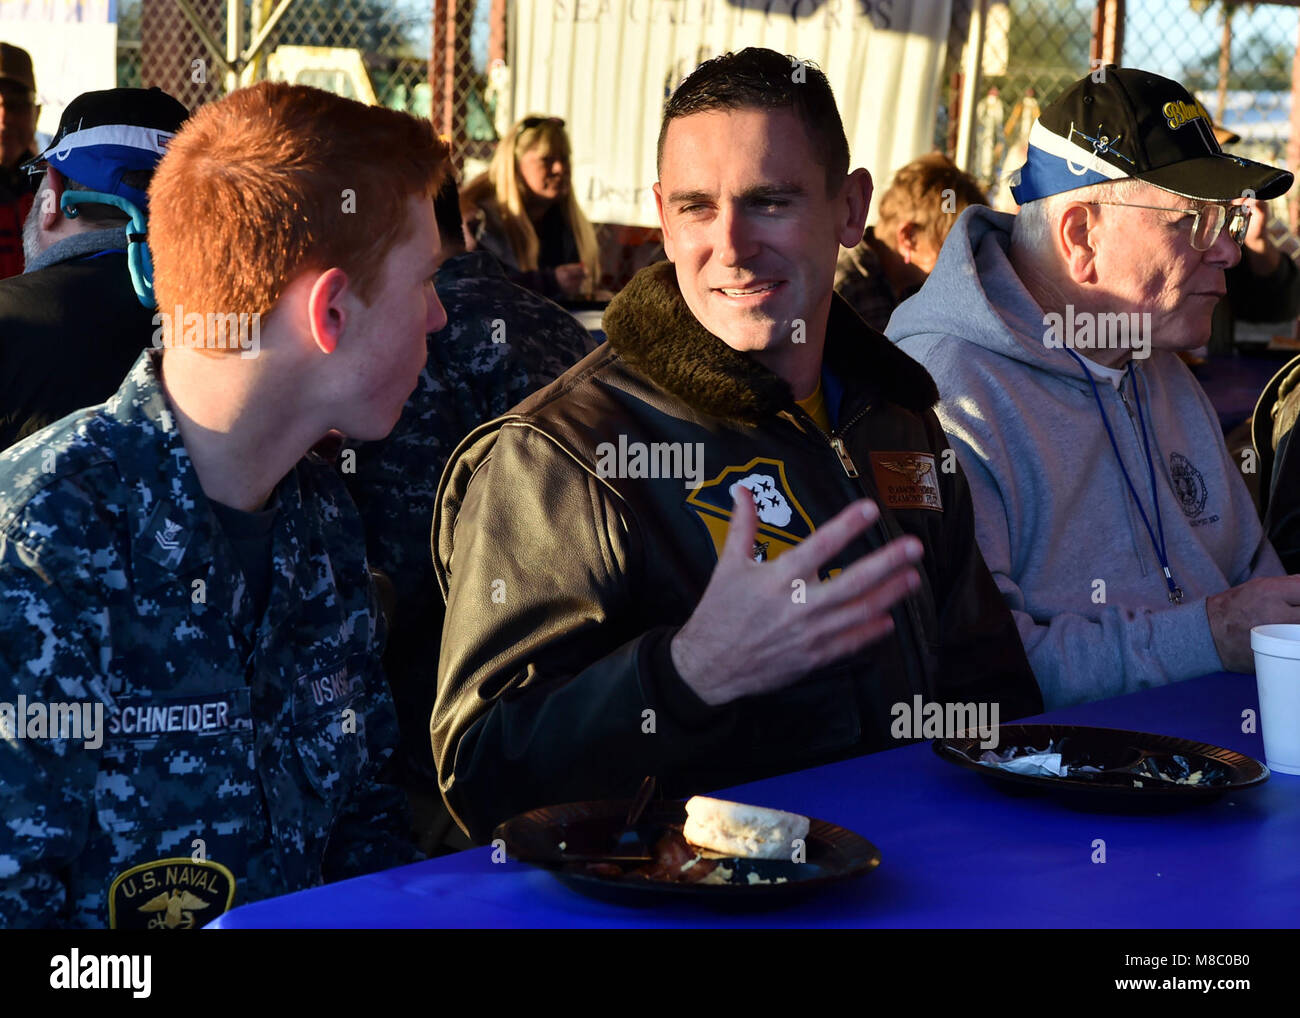 NAF EL CENTRO, Calif. (Feb. 24, 2018) Blue Angels Right Wing Pilot, Lt. Damon Kroes, speaks with a local Boy Scout during a breakfast event at NAF El Centro. The Blue Angels are scheduled to perform more than 60 demonstrations at more than 30 locations across the U.S. in 2018. (U.S. Navy Stock Photo